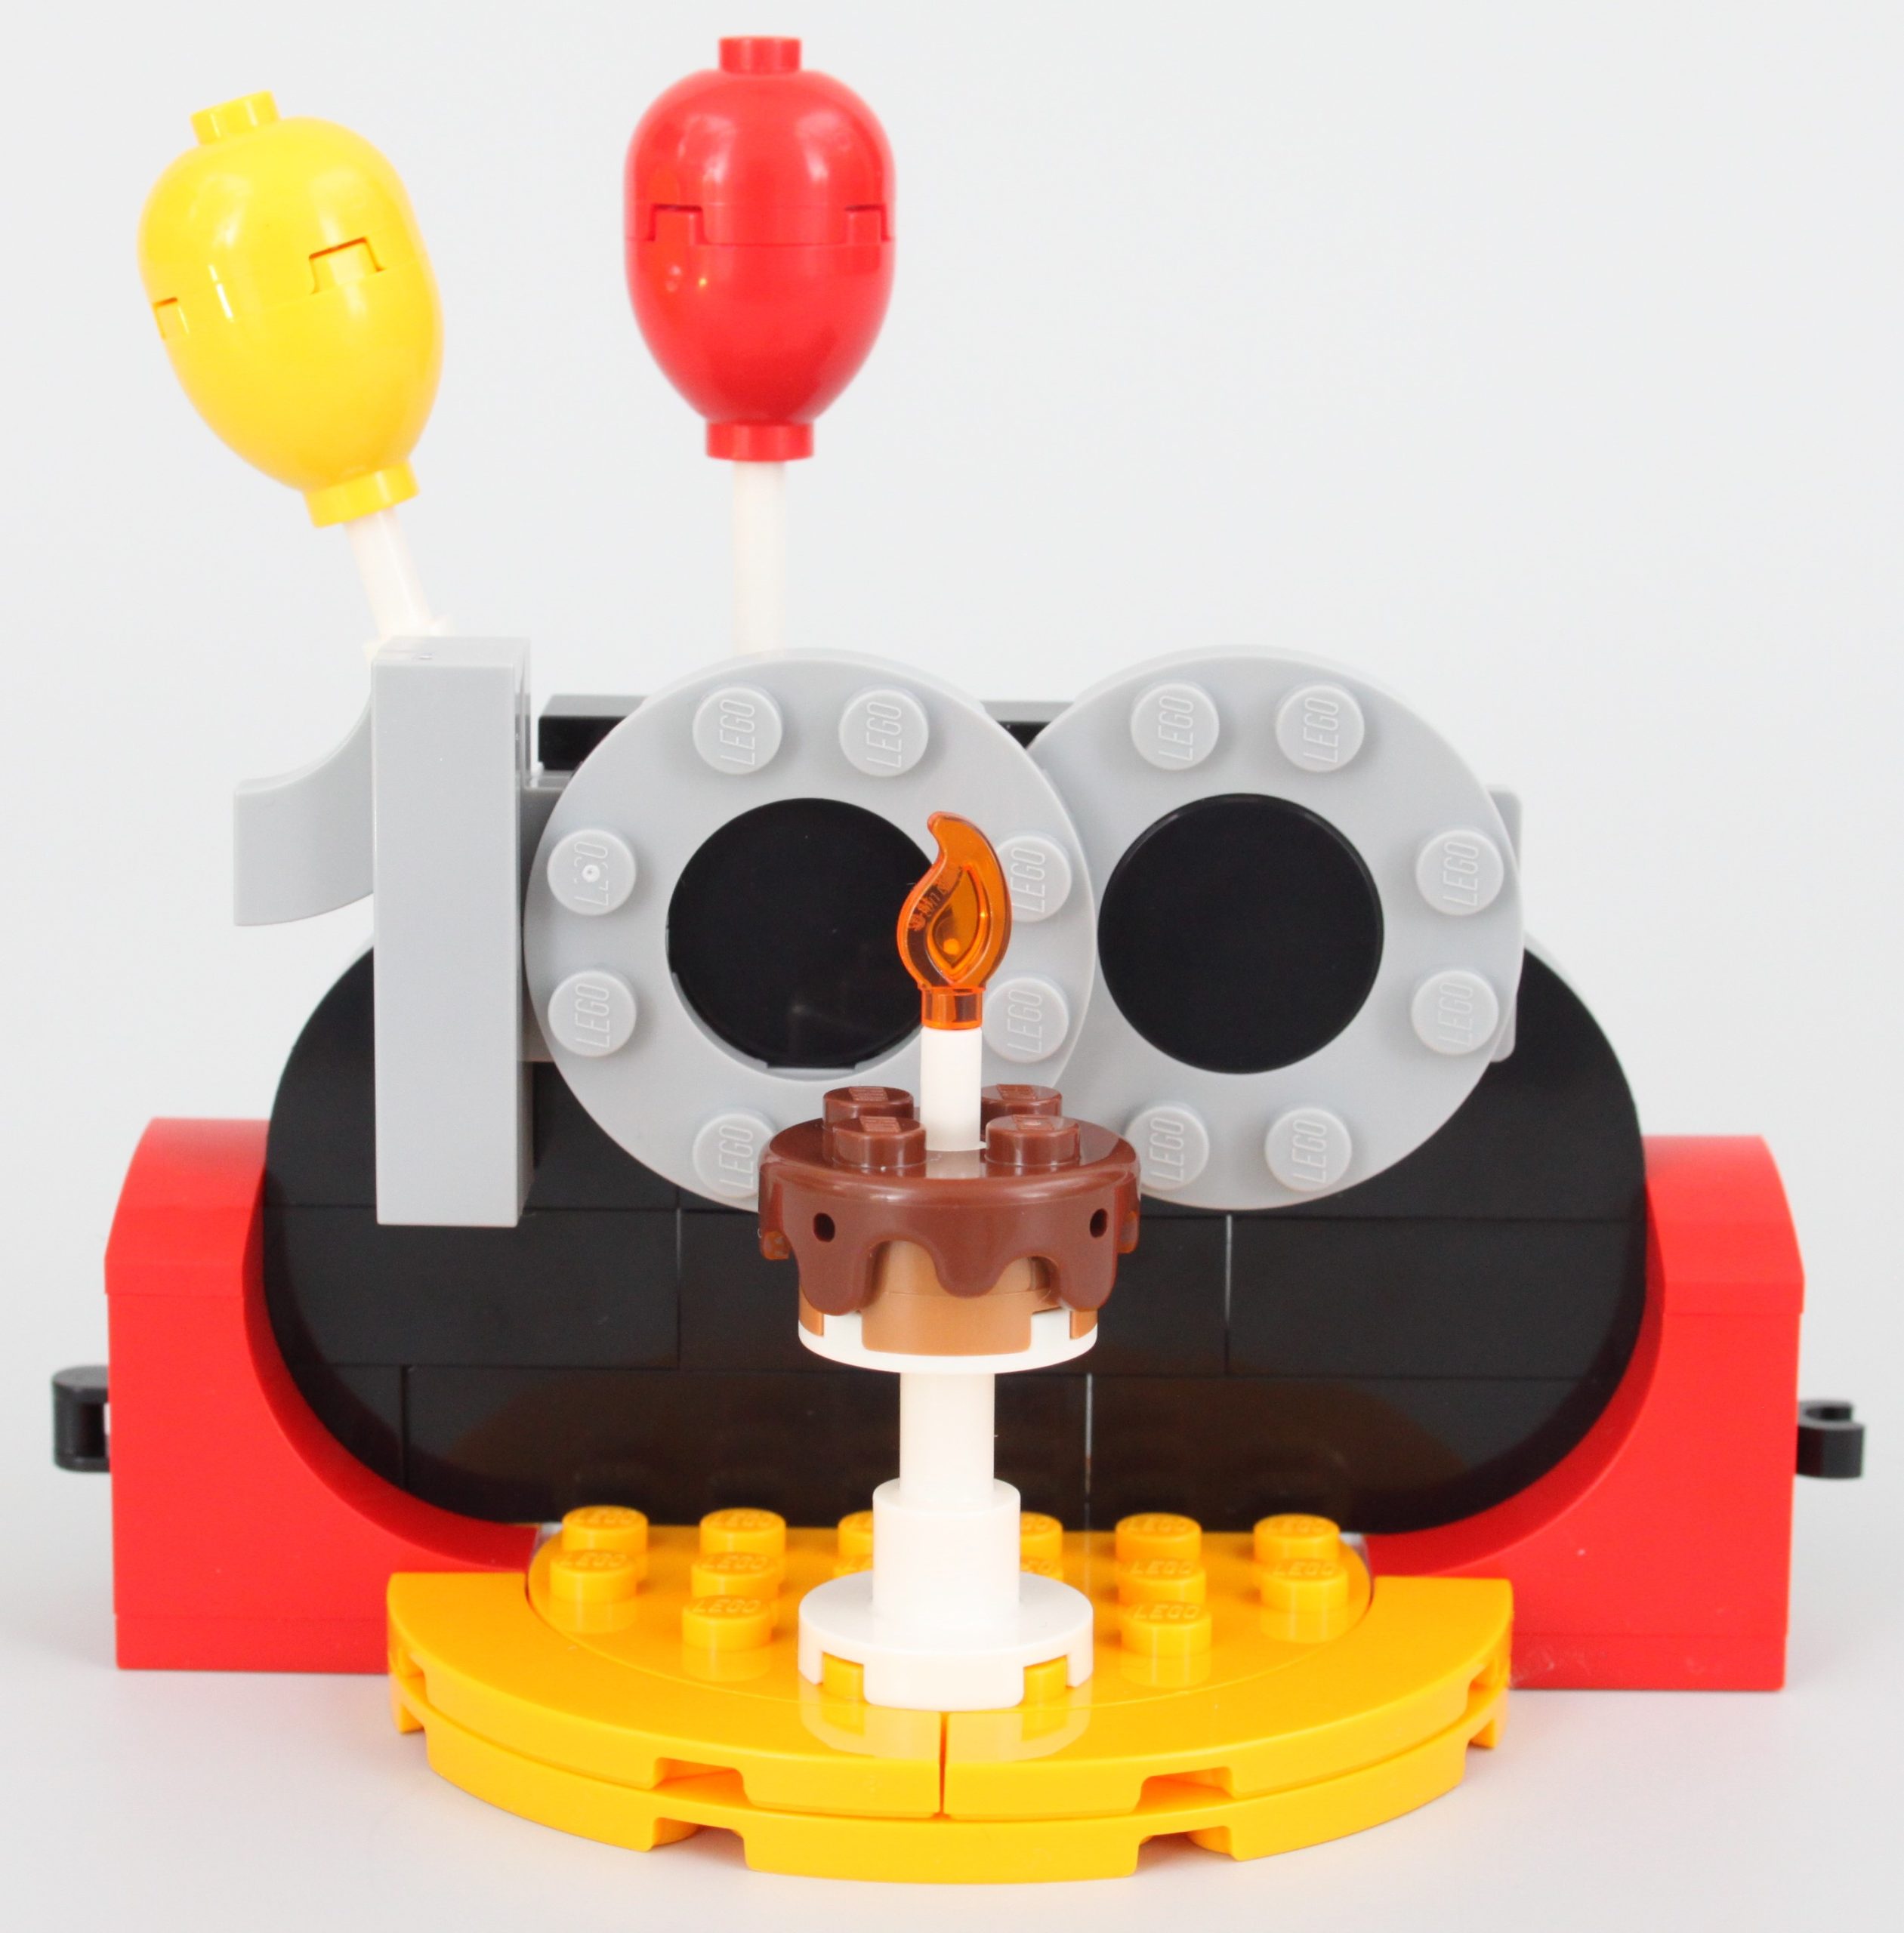 LEGO Disney 100 Years Celebration (40600) GWP Official Images - The Brick  Fan